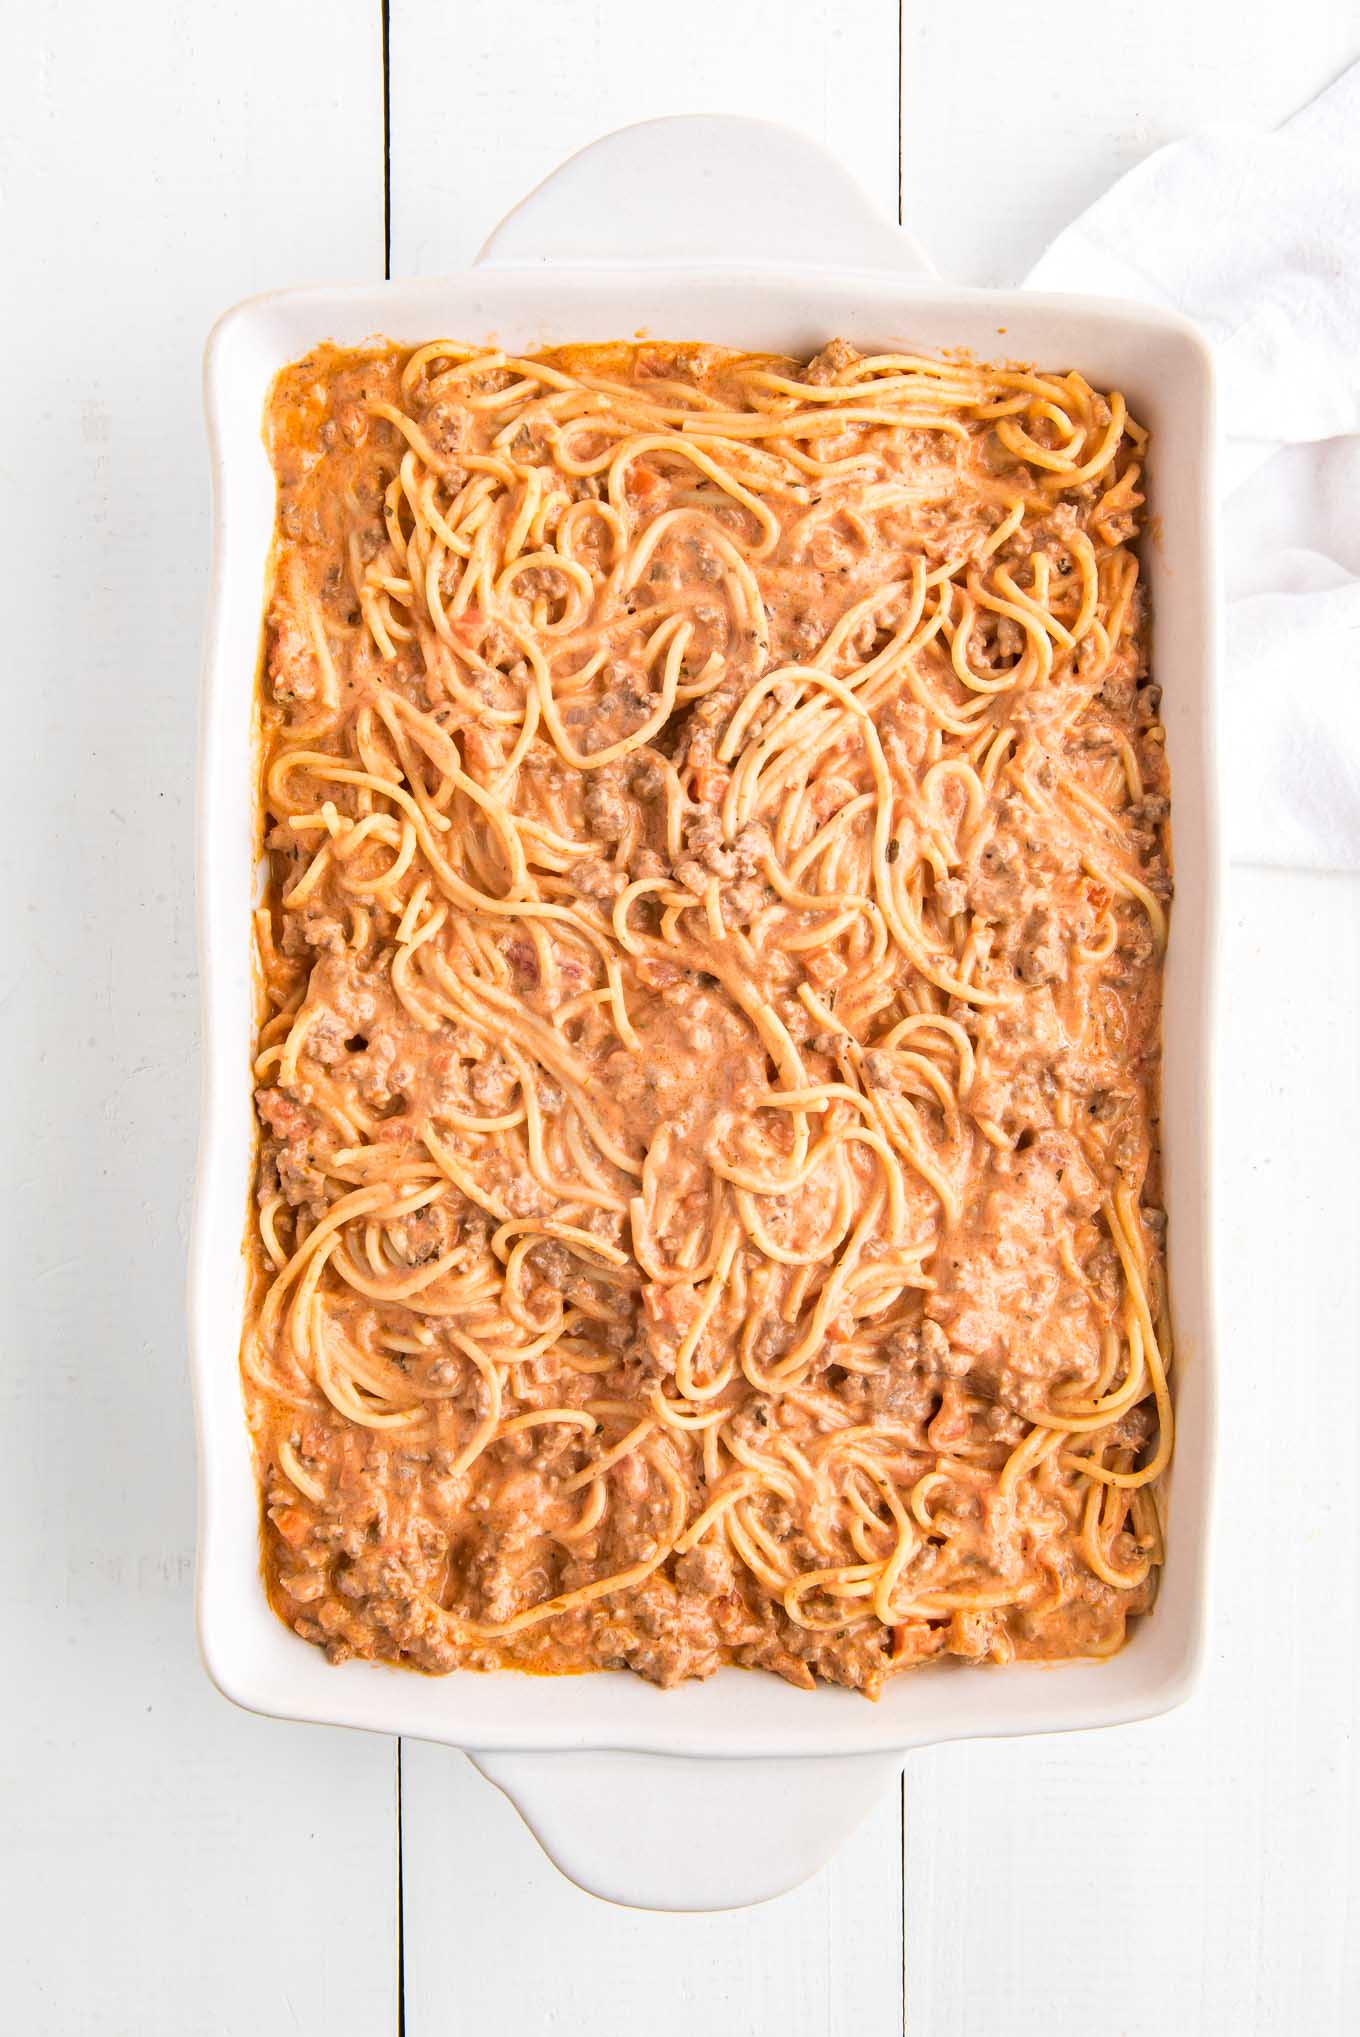 Spaghetti and meat sauce in a casserole dish.